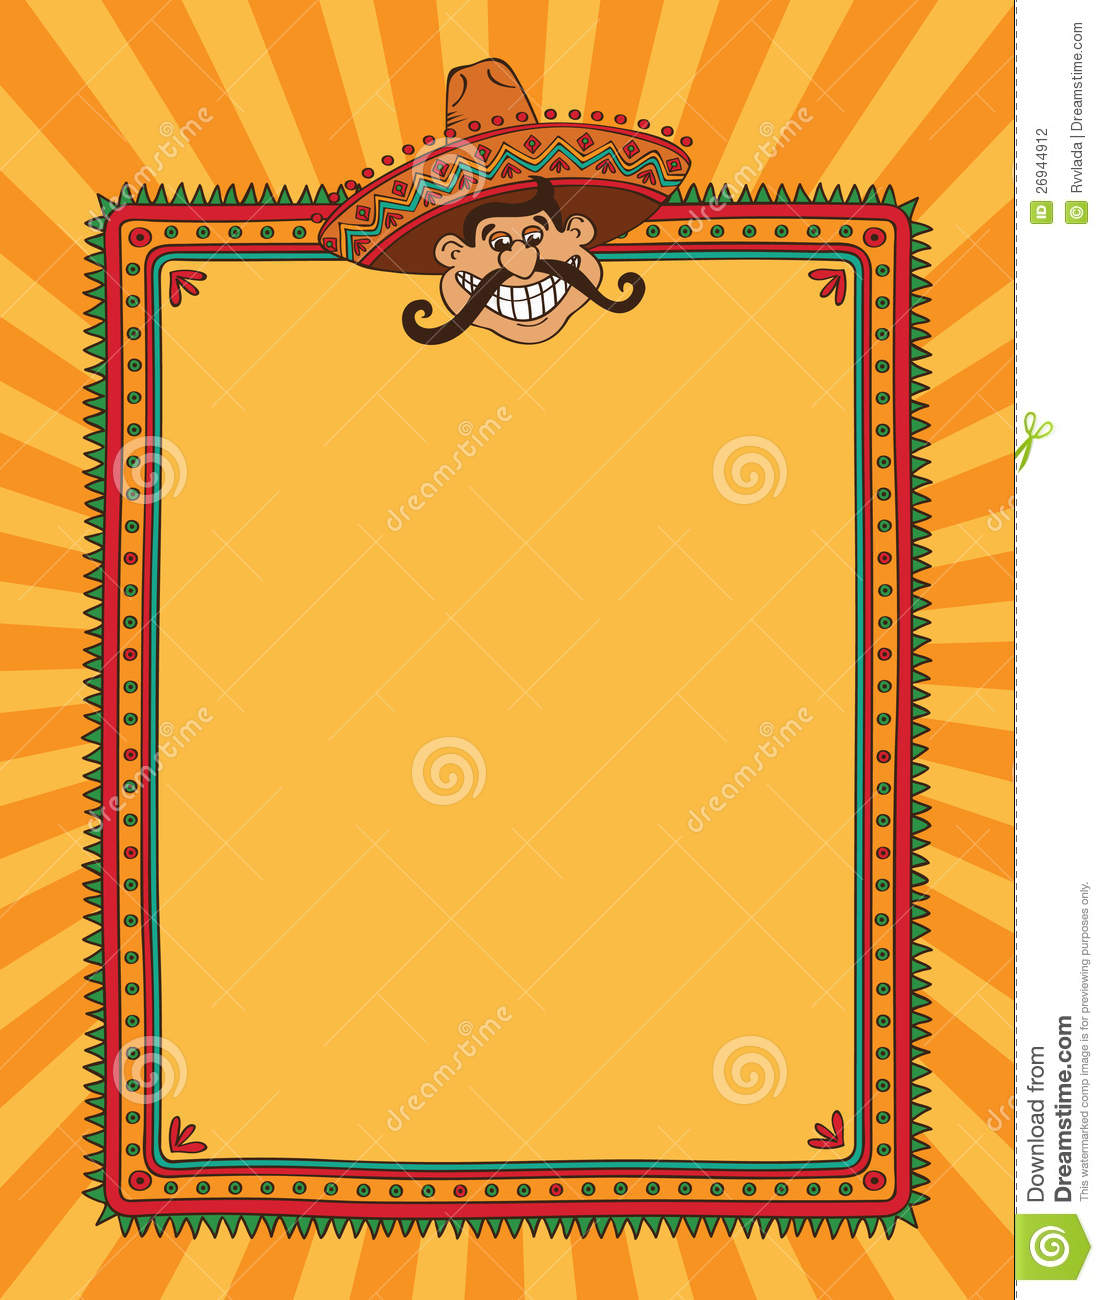 Mexican Fiesta Border Frame With Man In